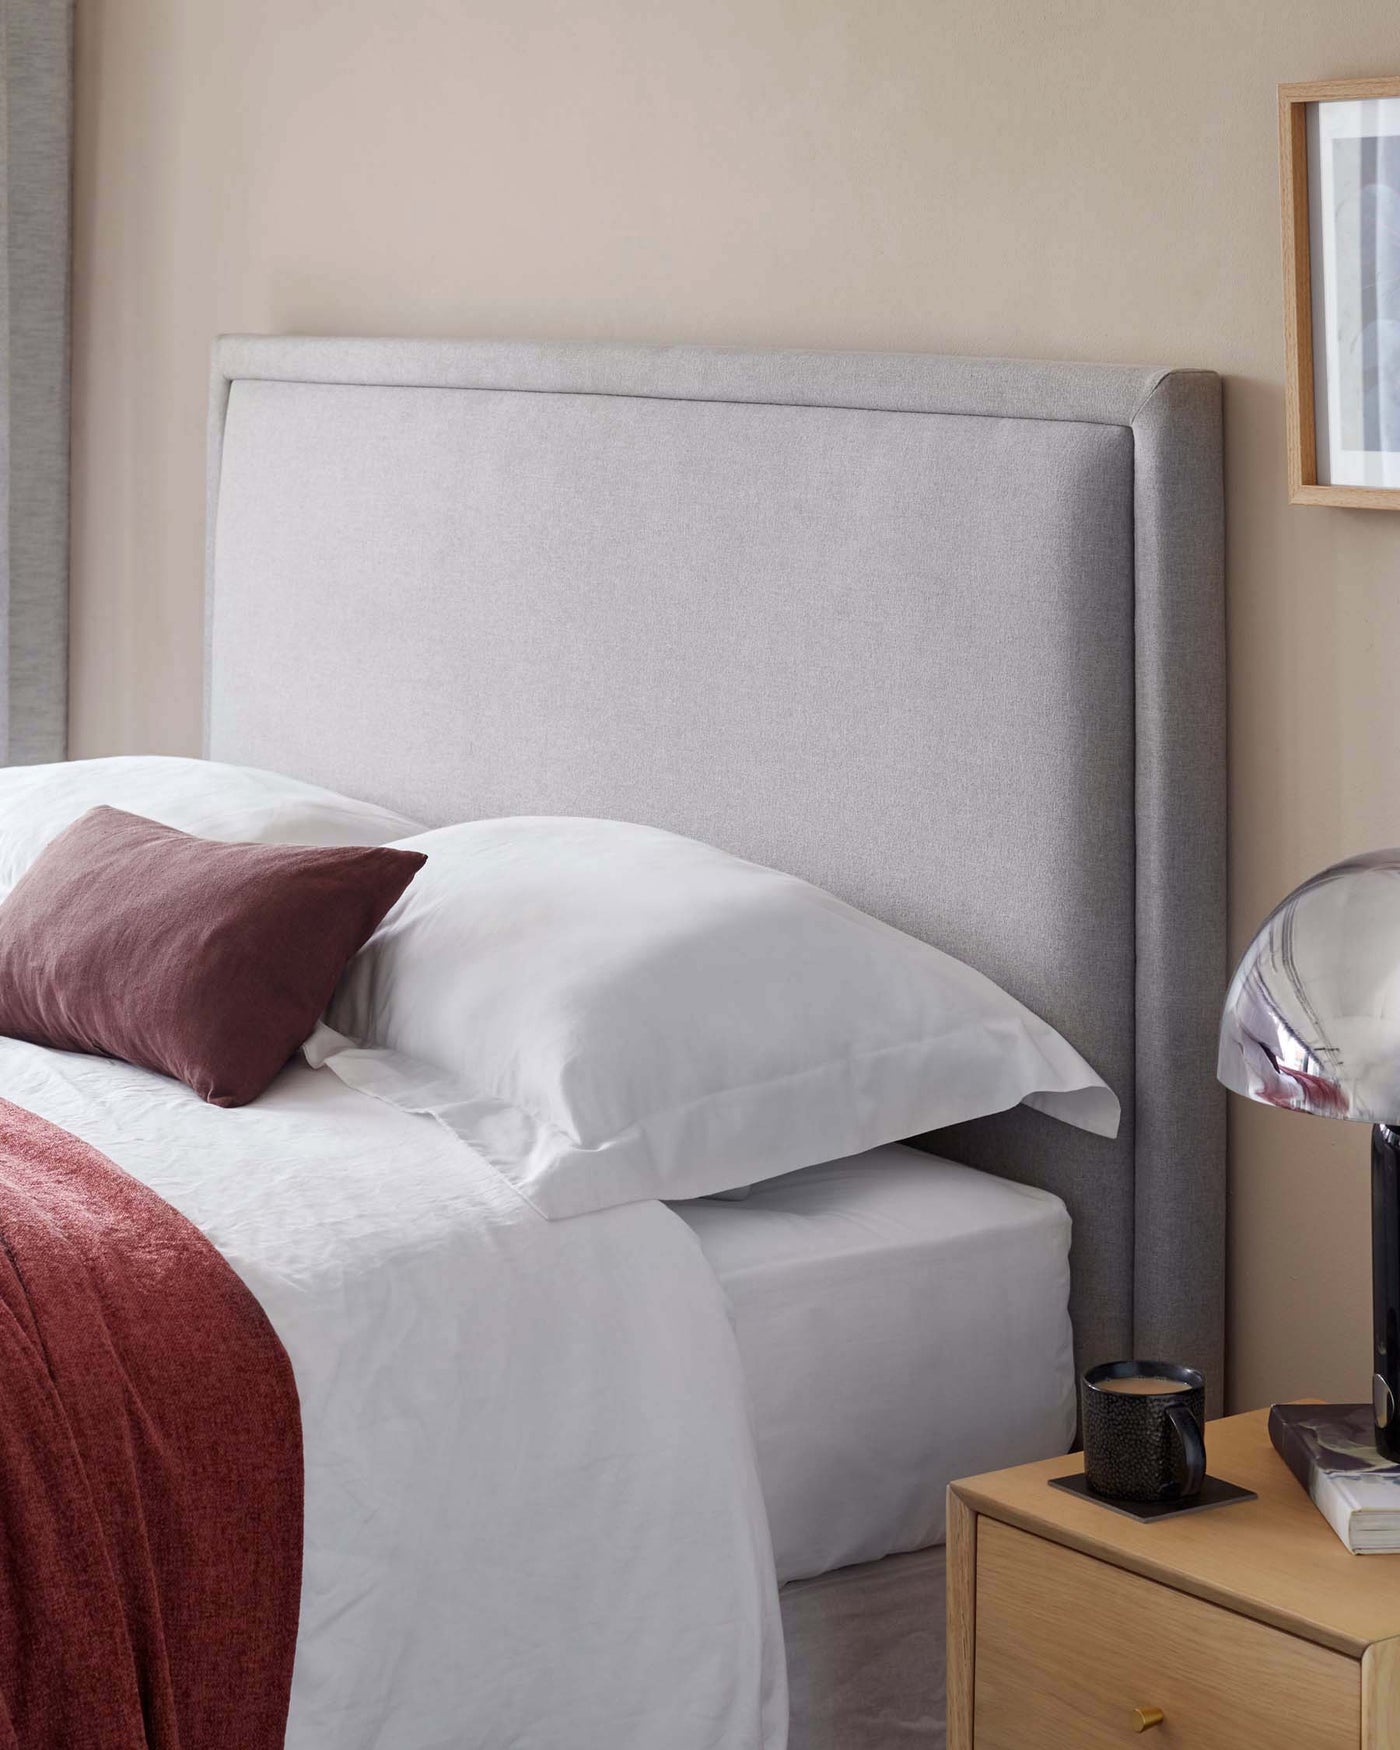 A modern bedroom featuring a large upholstered headboard in a neutral grey fabric. A wooden bedside table with a simple drawer and a metal handle is visible beside the bed, matching the understated and contemporary style of the room.